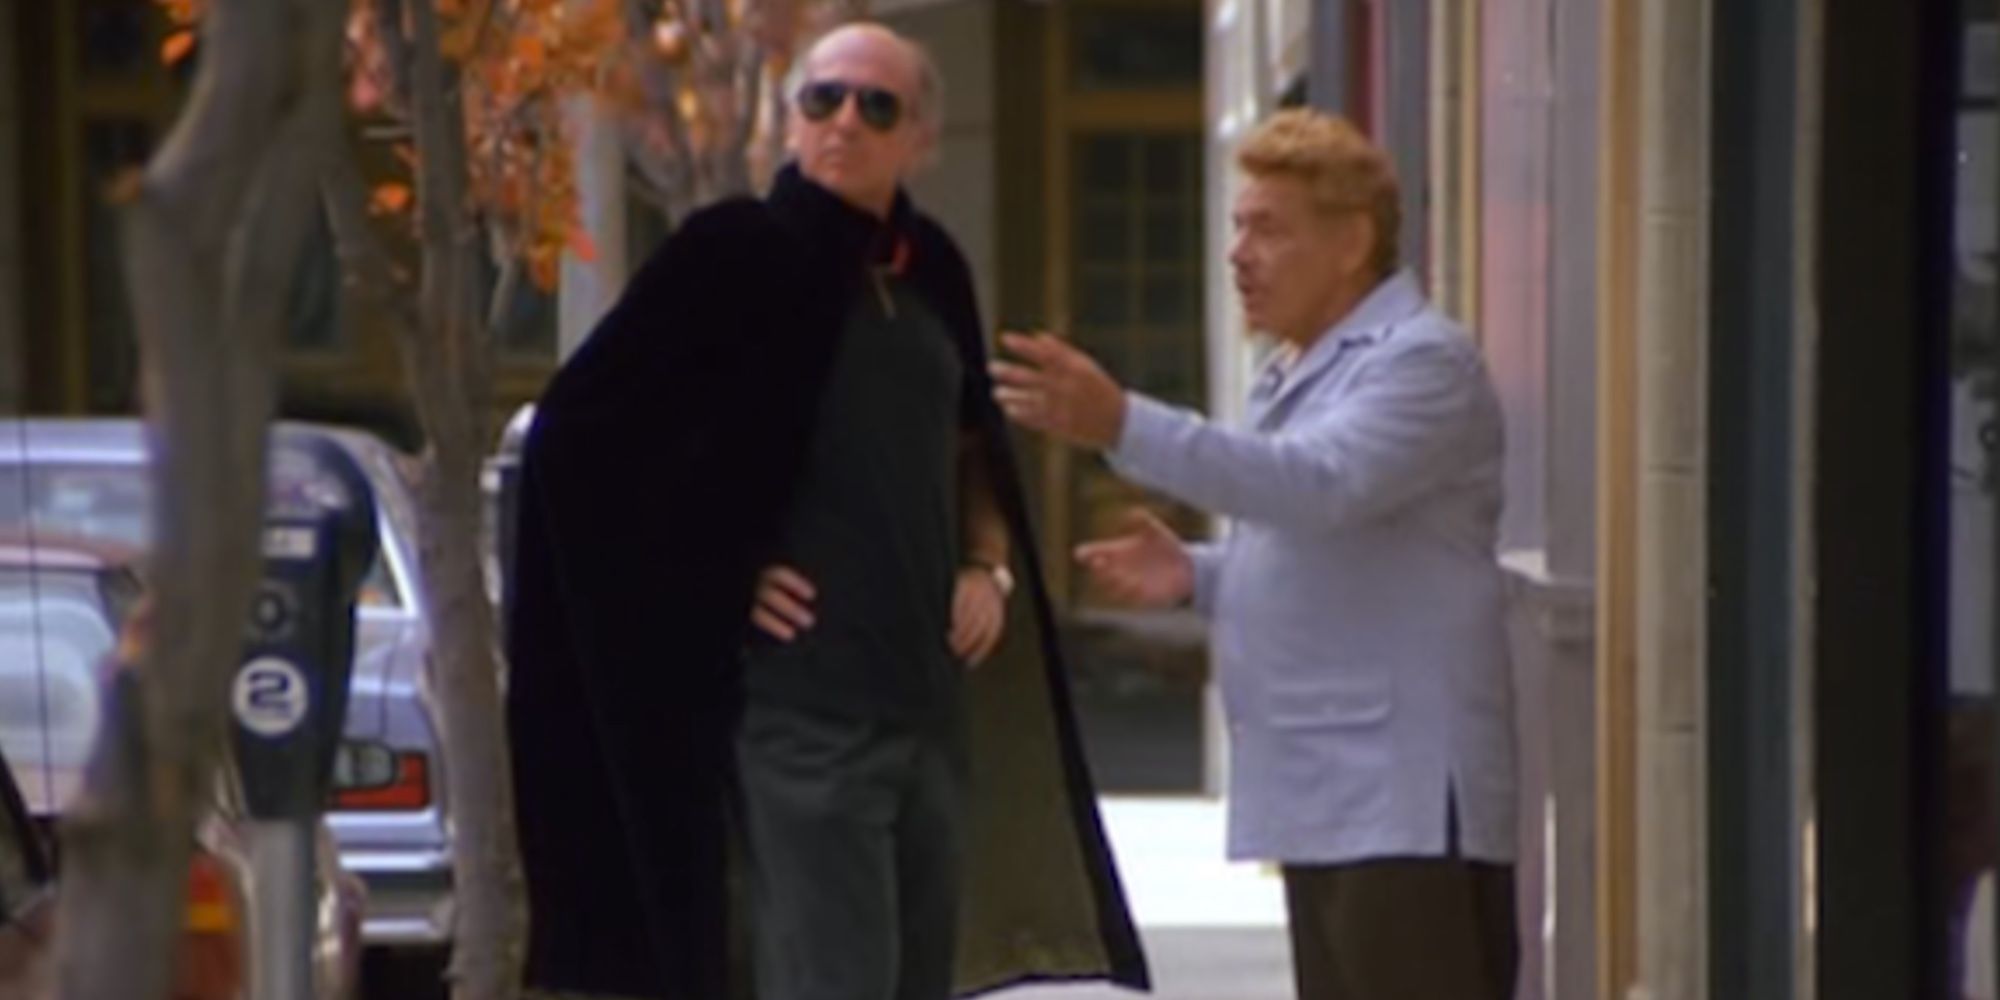 Larry David as the man in the cape